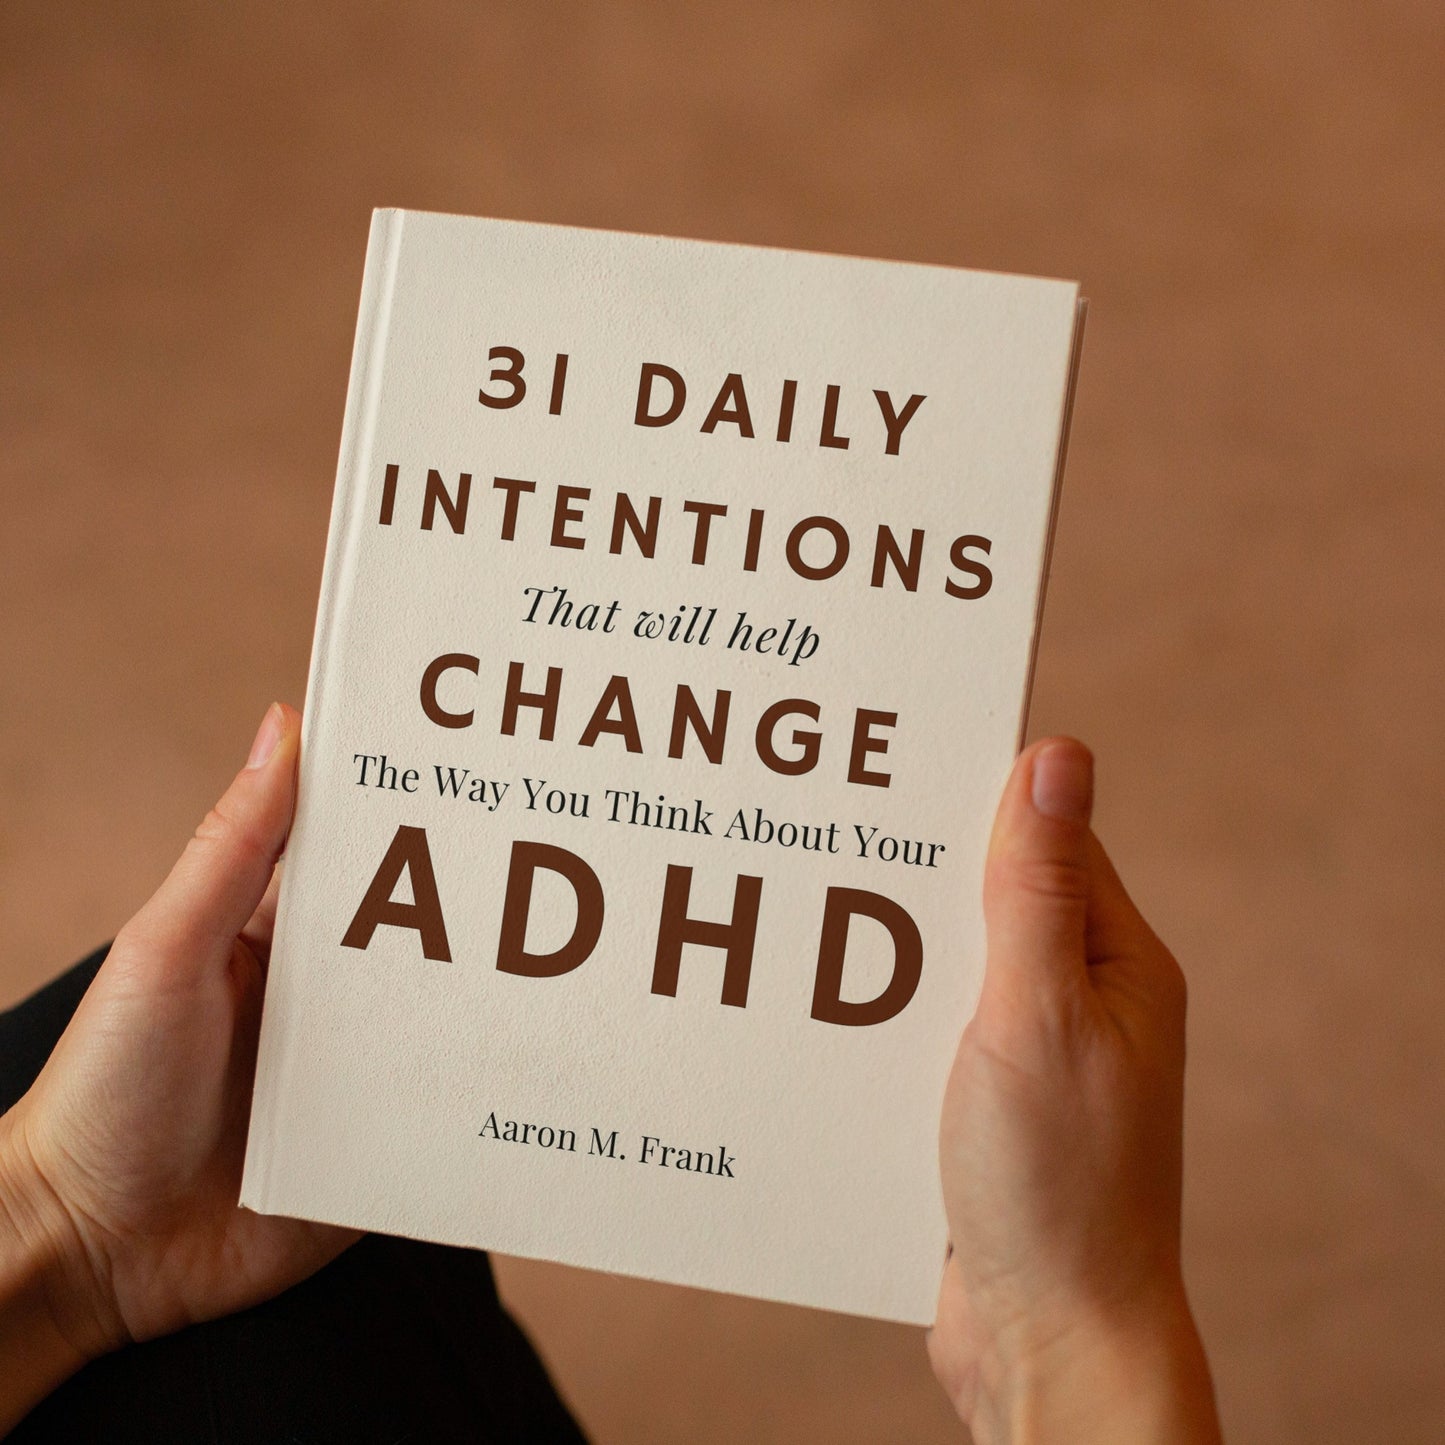 31 Daily Intentions That Will Help Change The Way You Think About Your ADHD